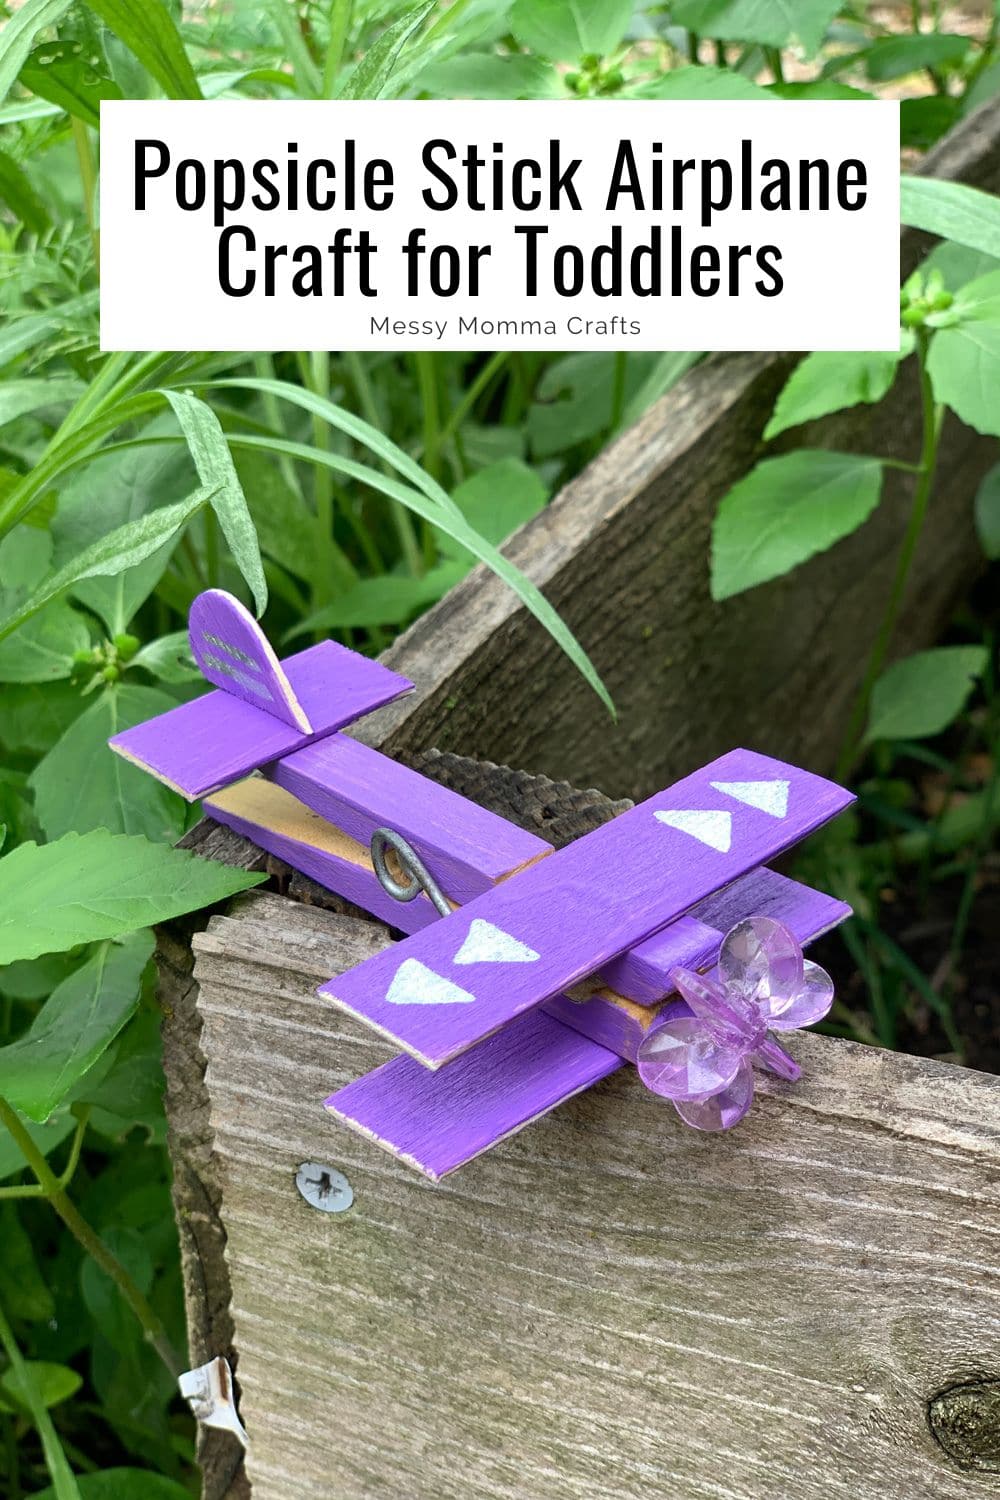 Popsicle stick airplane craft for toddlers.